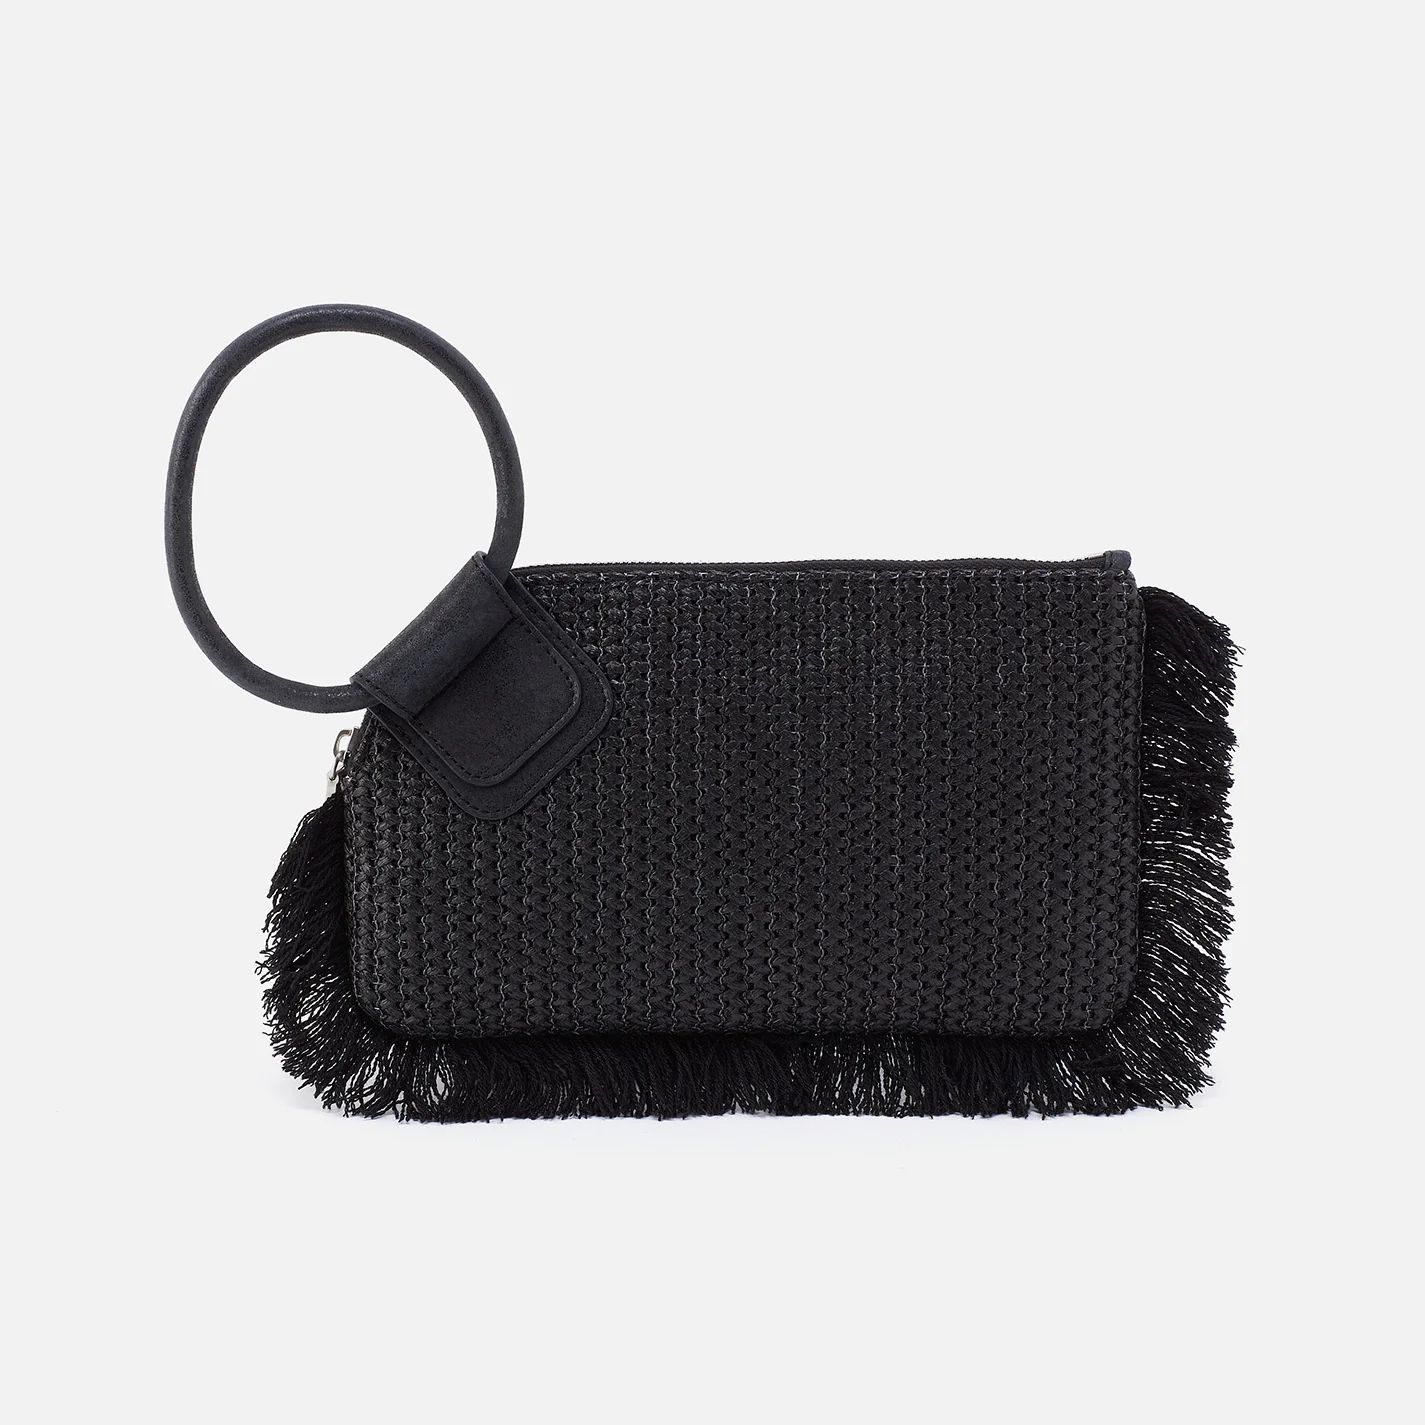 Sable Wristlet in Raffia With Leather Trim - Black | HOBO Bags